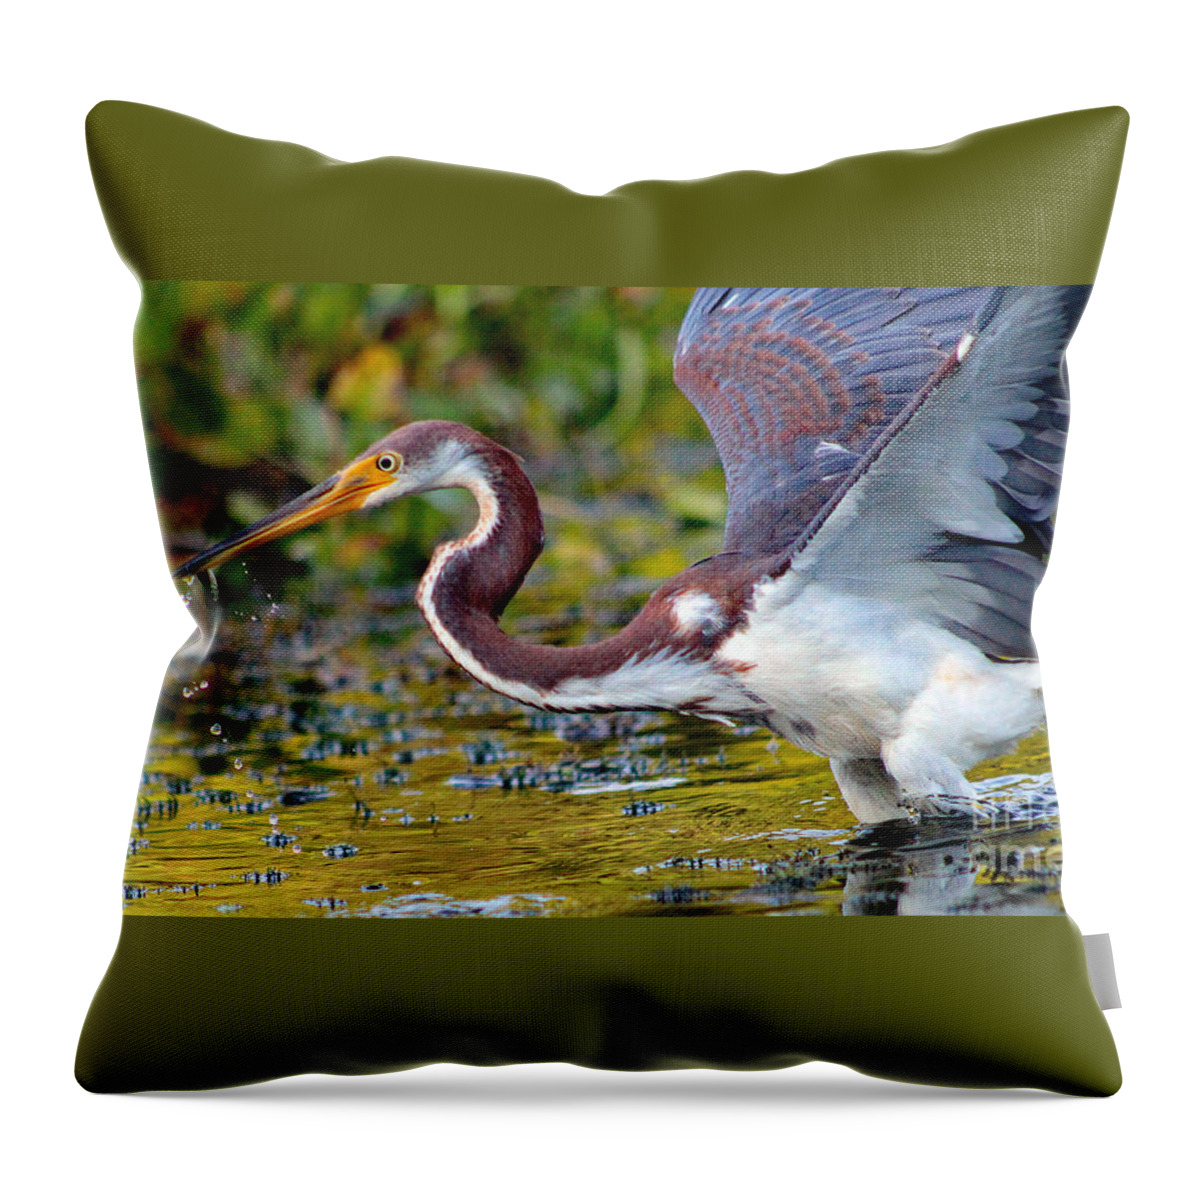 Art Throw Pillow featuring the photograph Snack - Signed by DB Hayes